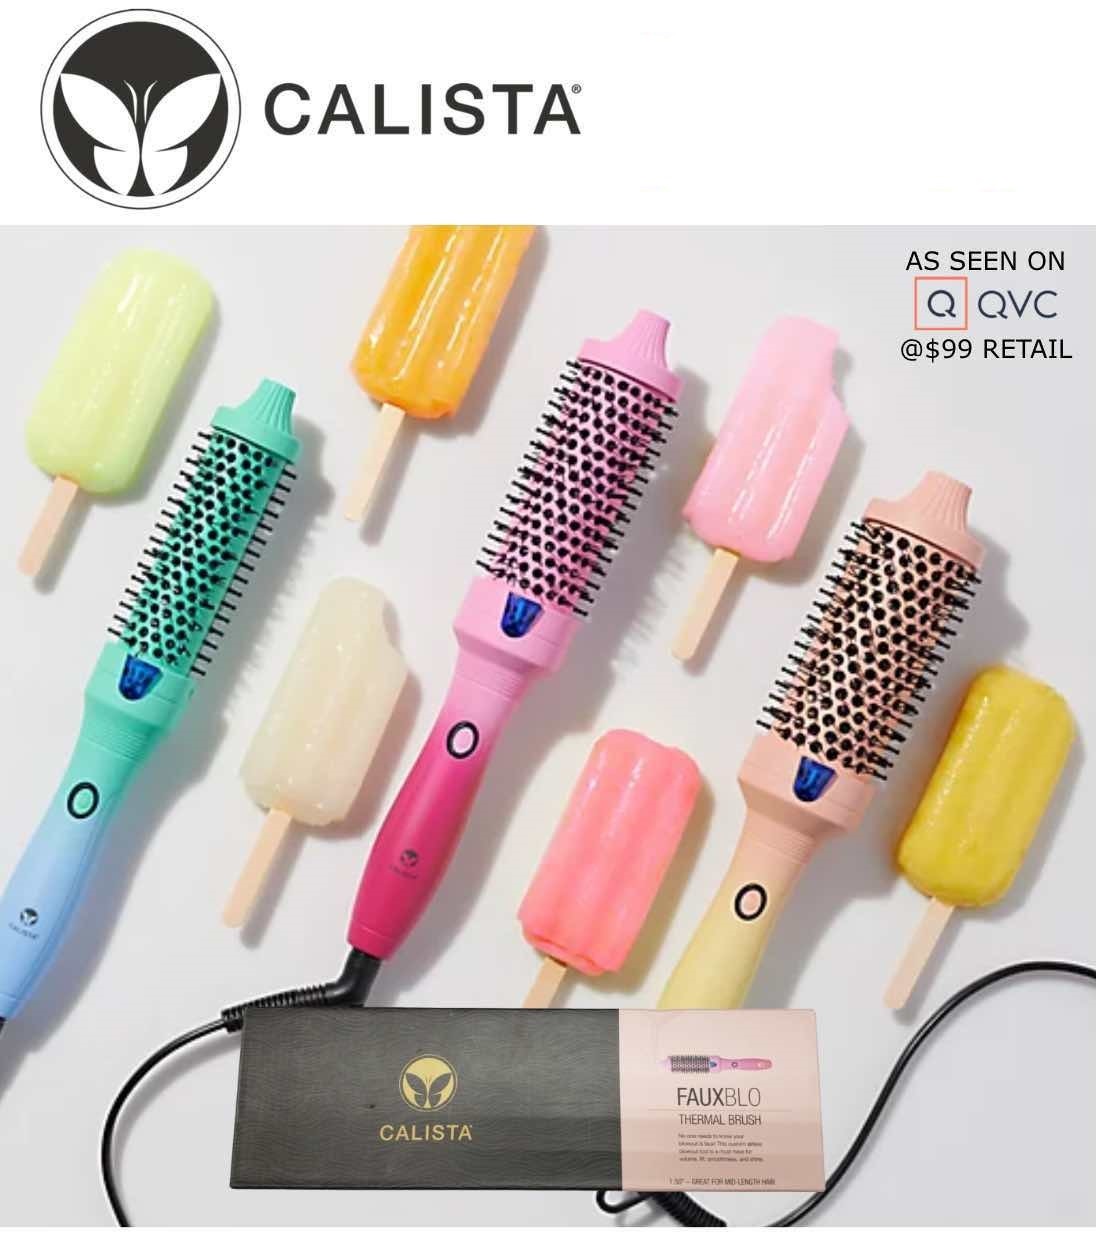 49920 - FAUXBLO HEATED STYLING BRUSHES BY CALISTA USA